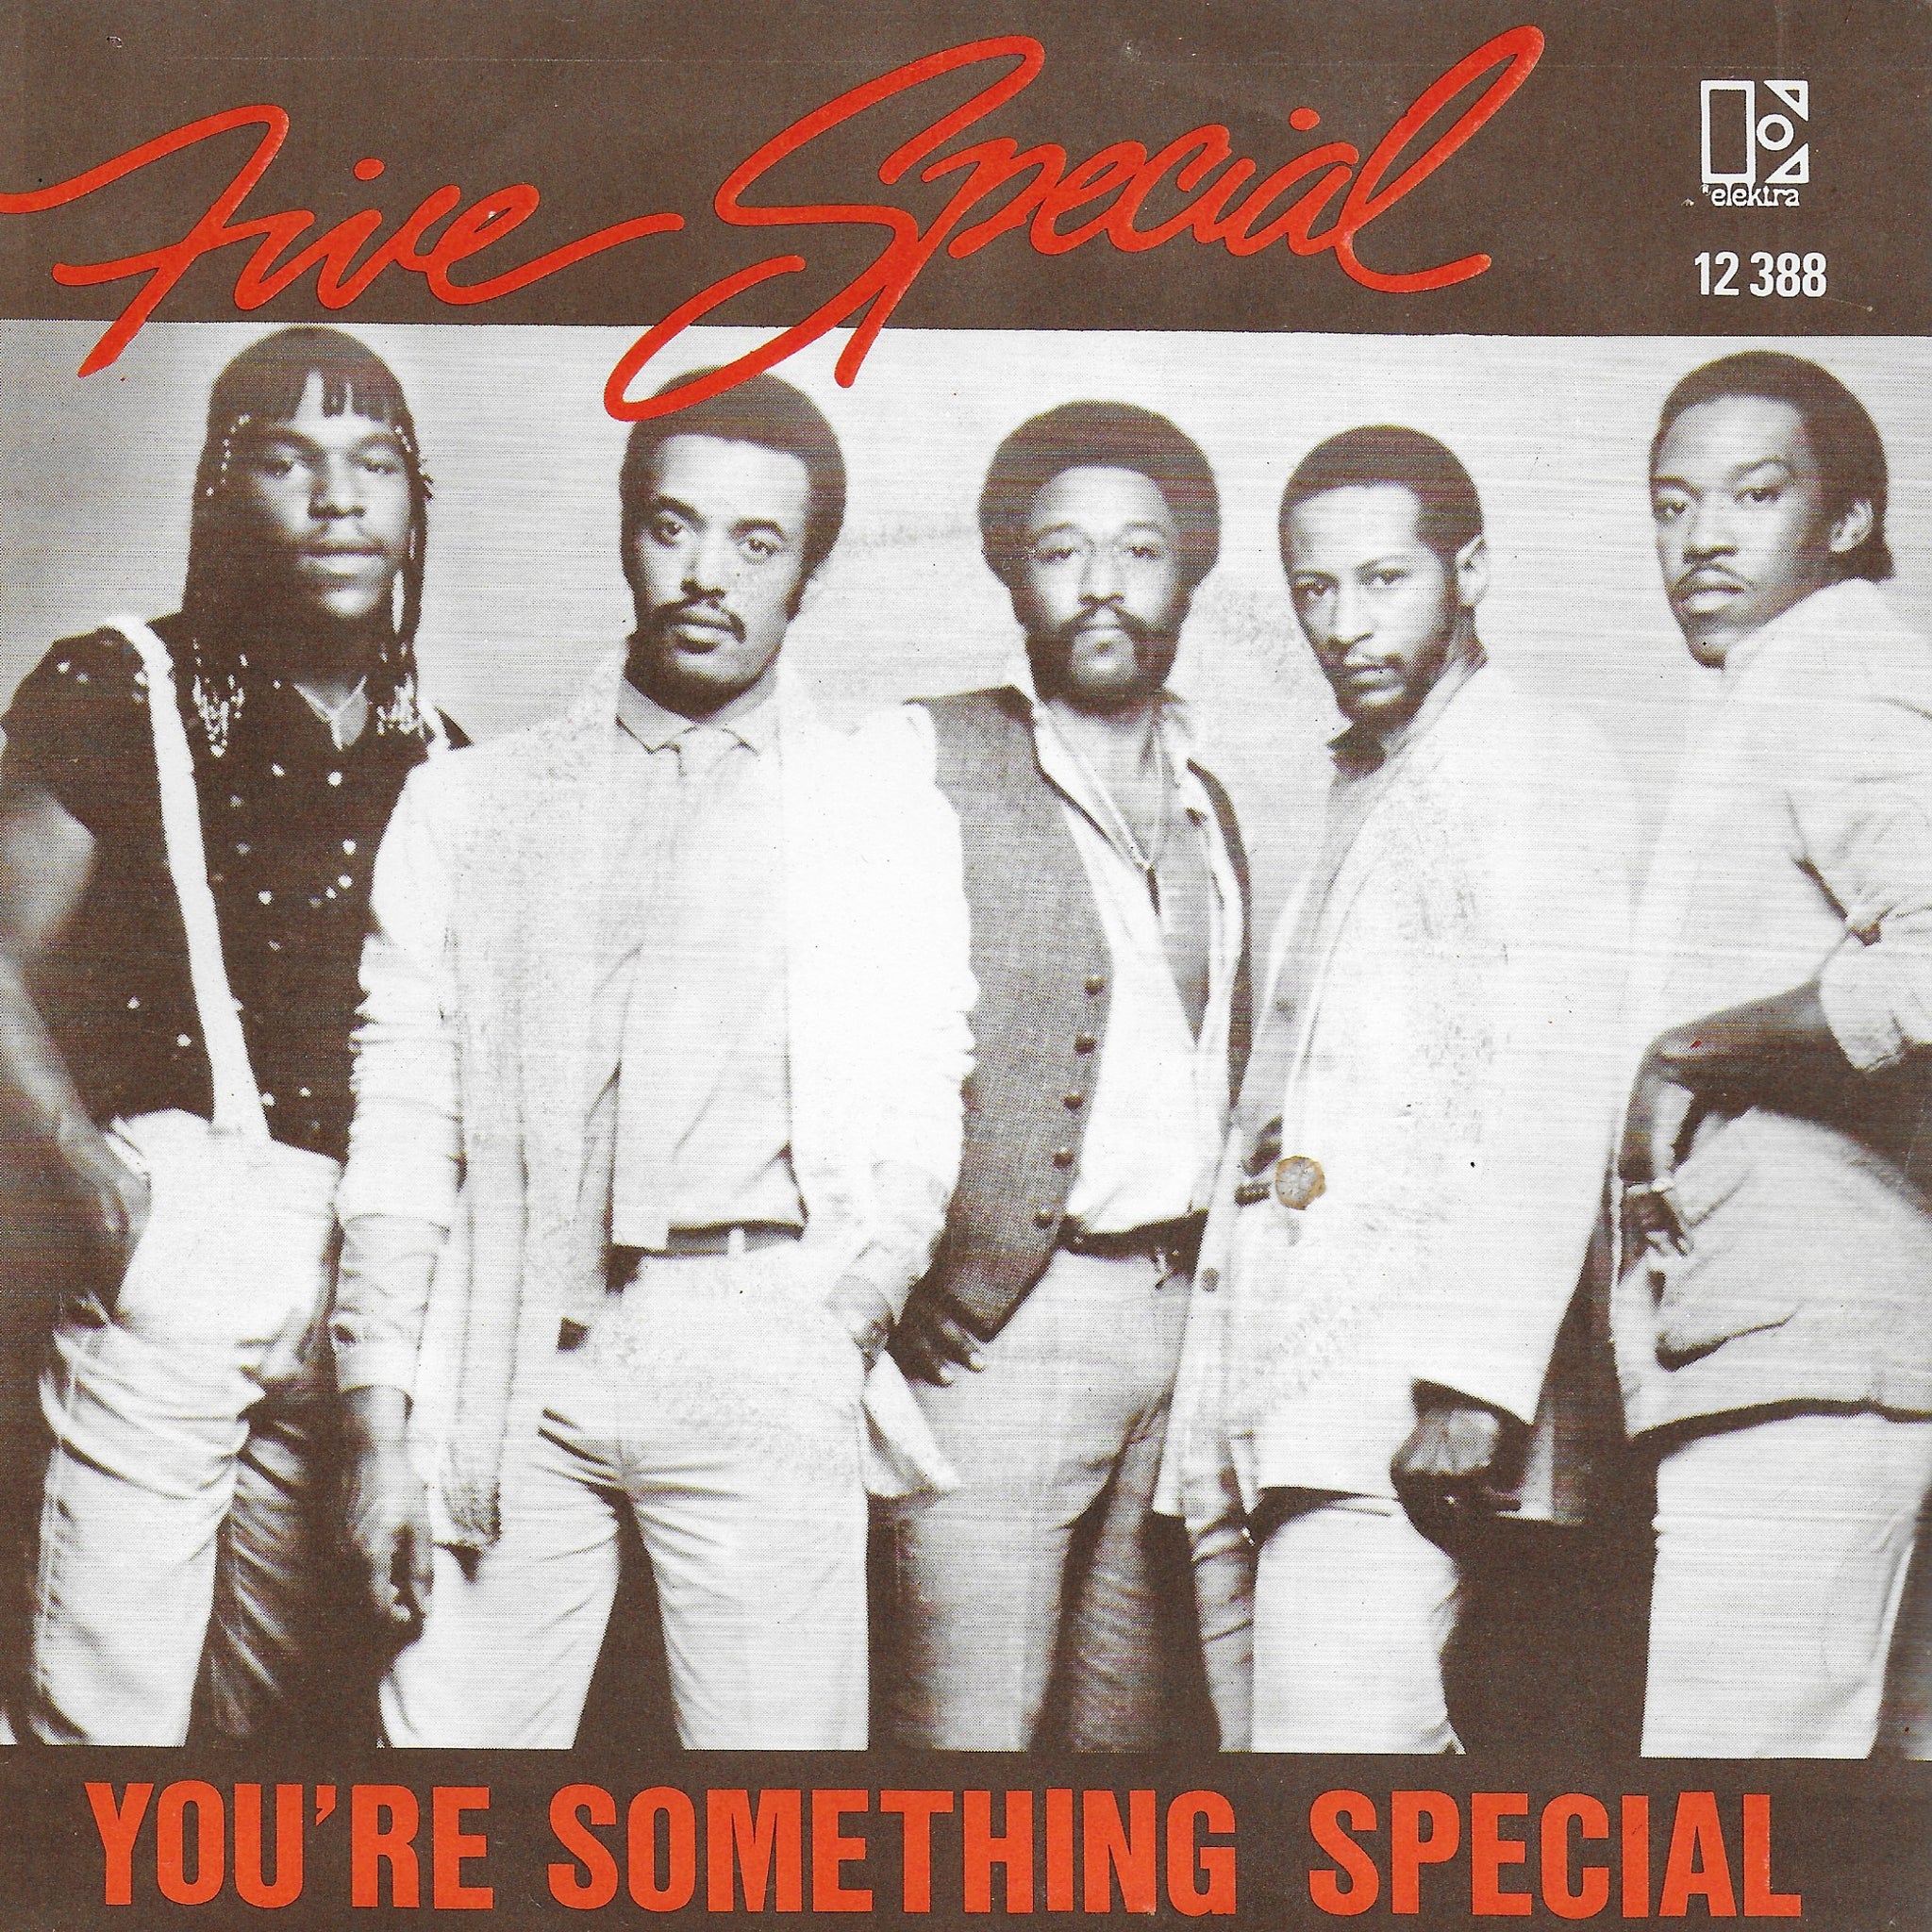 Five Special - You're something special (Belgische uitgave)